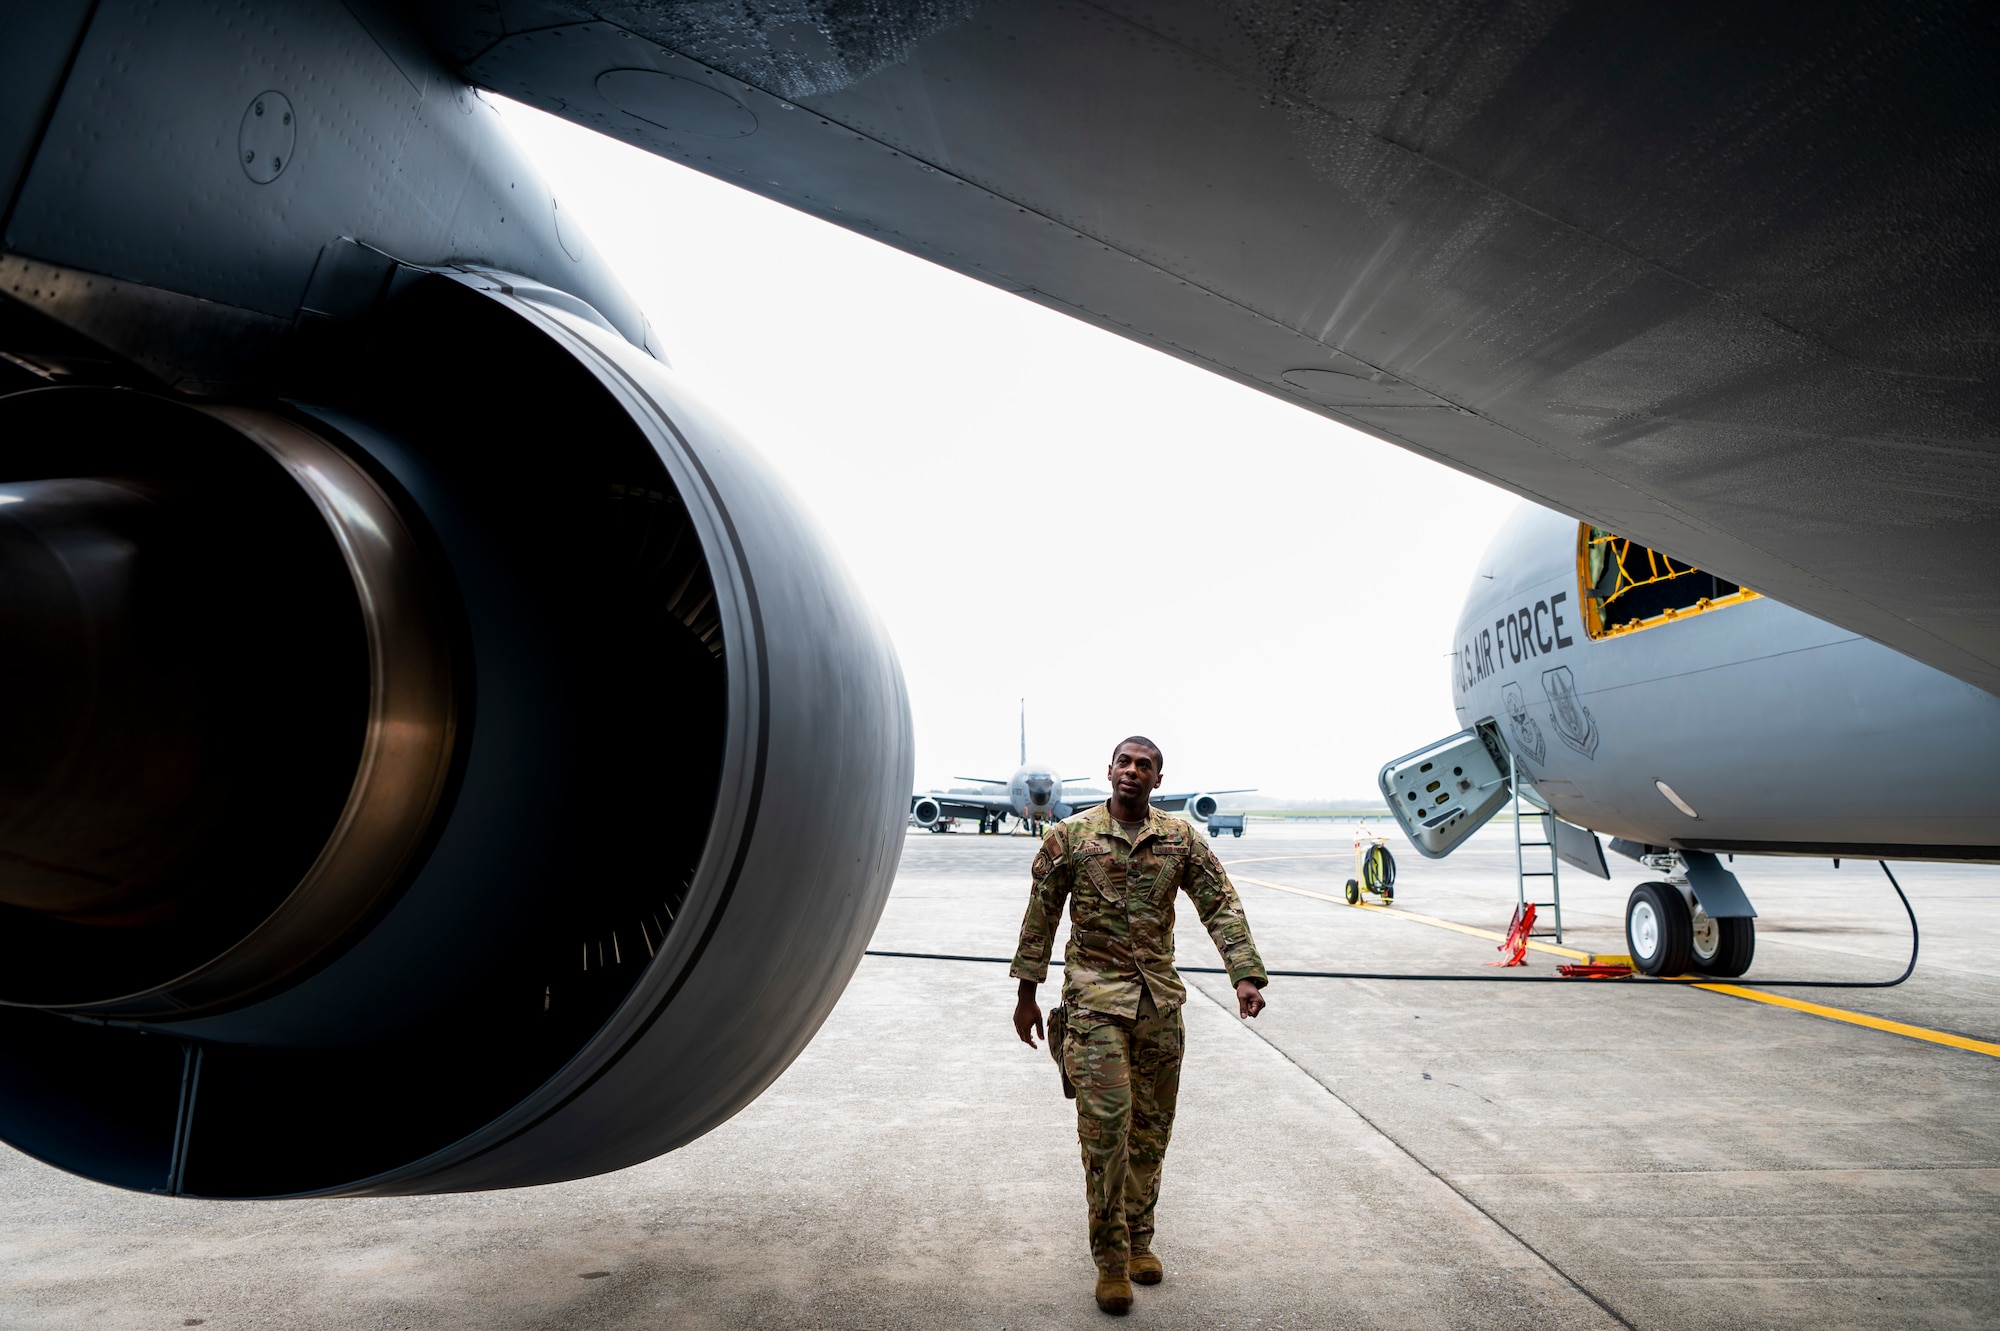 U.S. Air Force Major Christopher Daniels, a pilot assigned to the 91st Air Refueling Squadron inspects a KC-135 Stratotanker before taking off from Bangor Air National Guard Base, Maine, Aug. 24, 2022.